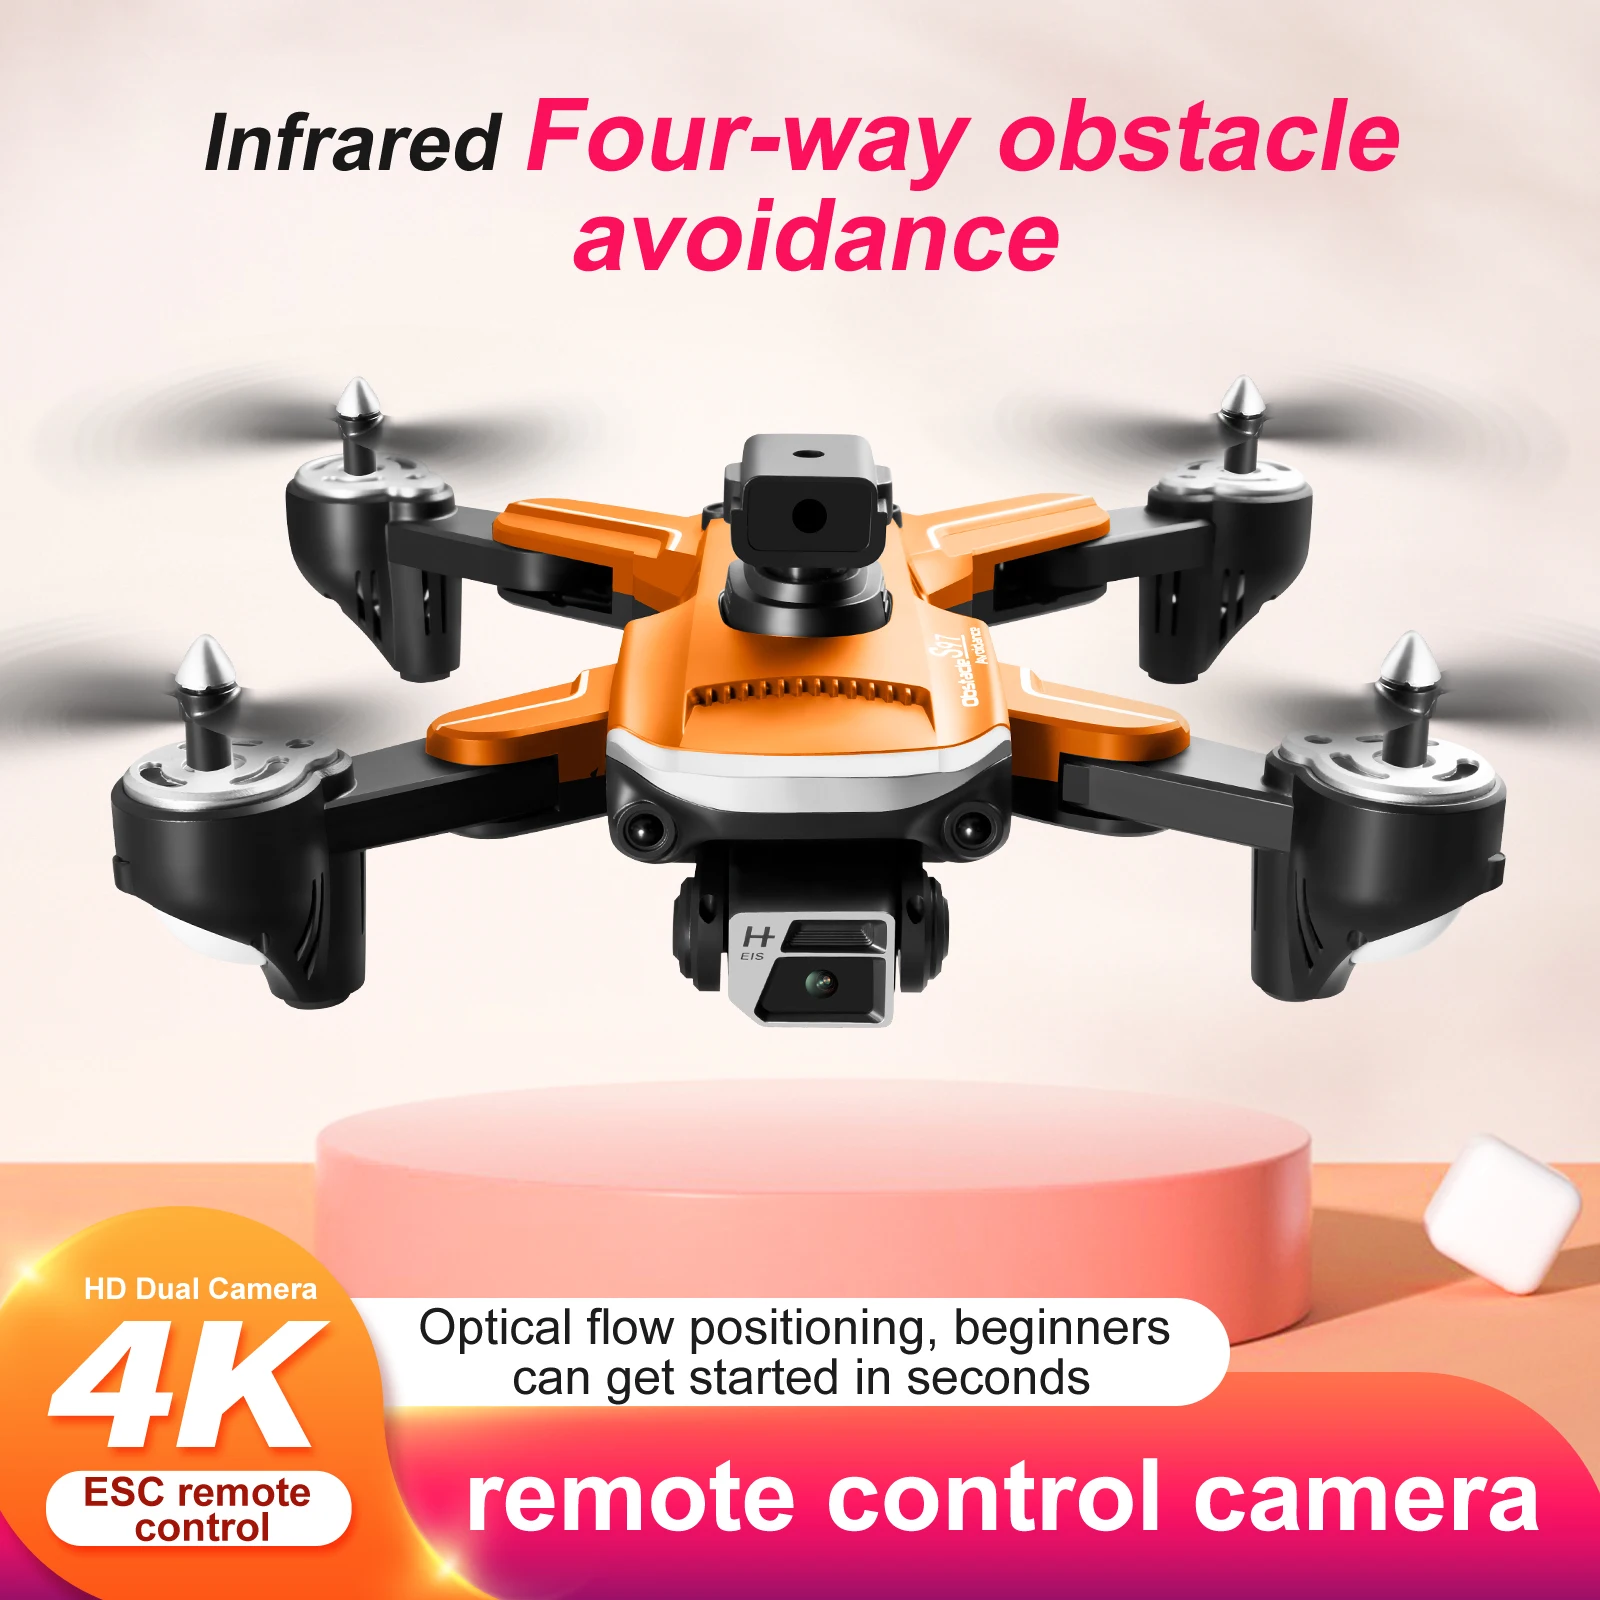 

New S97 Drone 4k Profesional HD Dual Camera WiFi Fpv Obstacle Avoidance Quadcopter Foldable ESC Trajectory Flight Rc Drone Toys